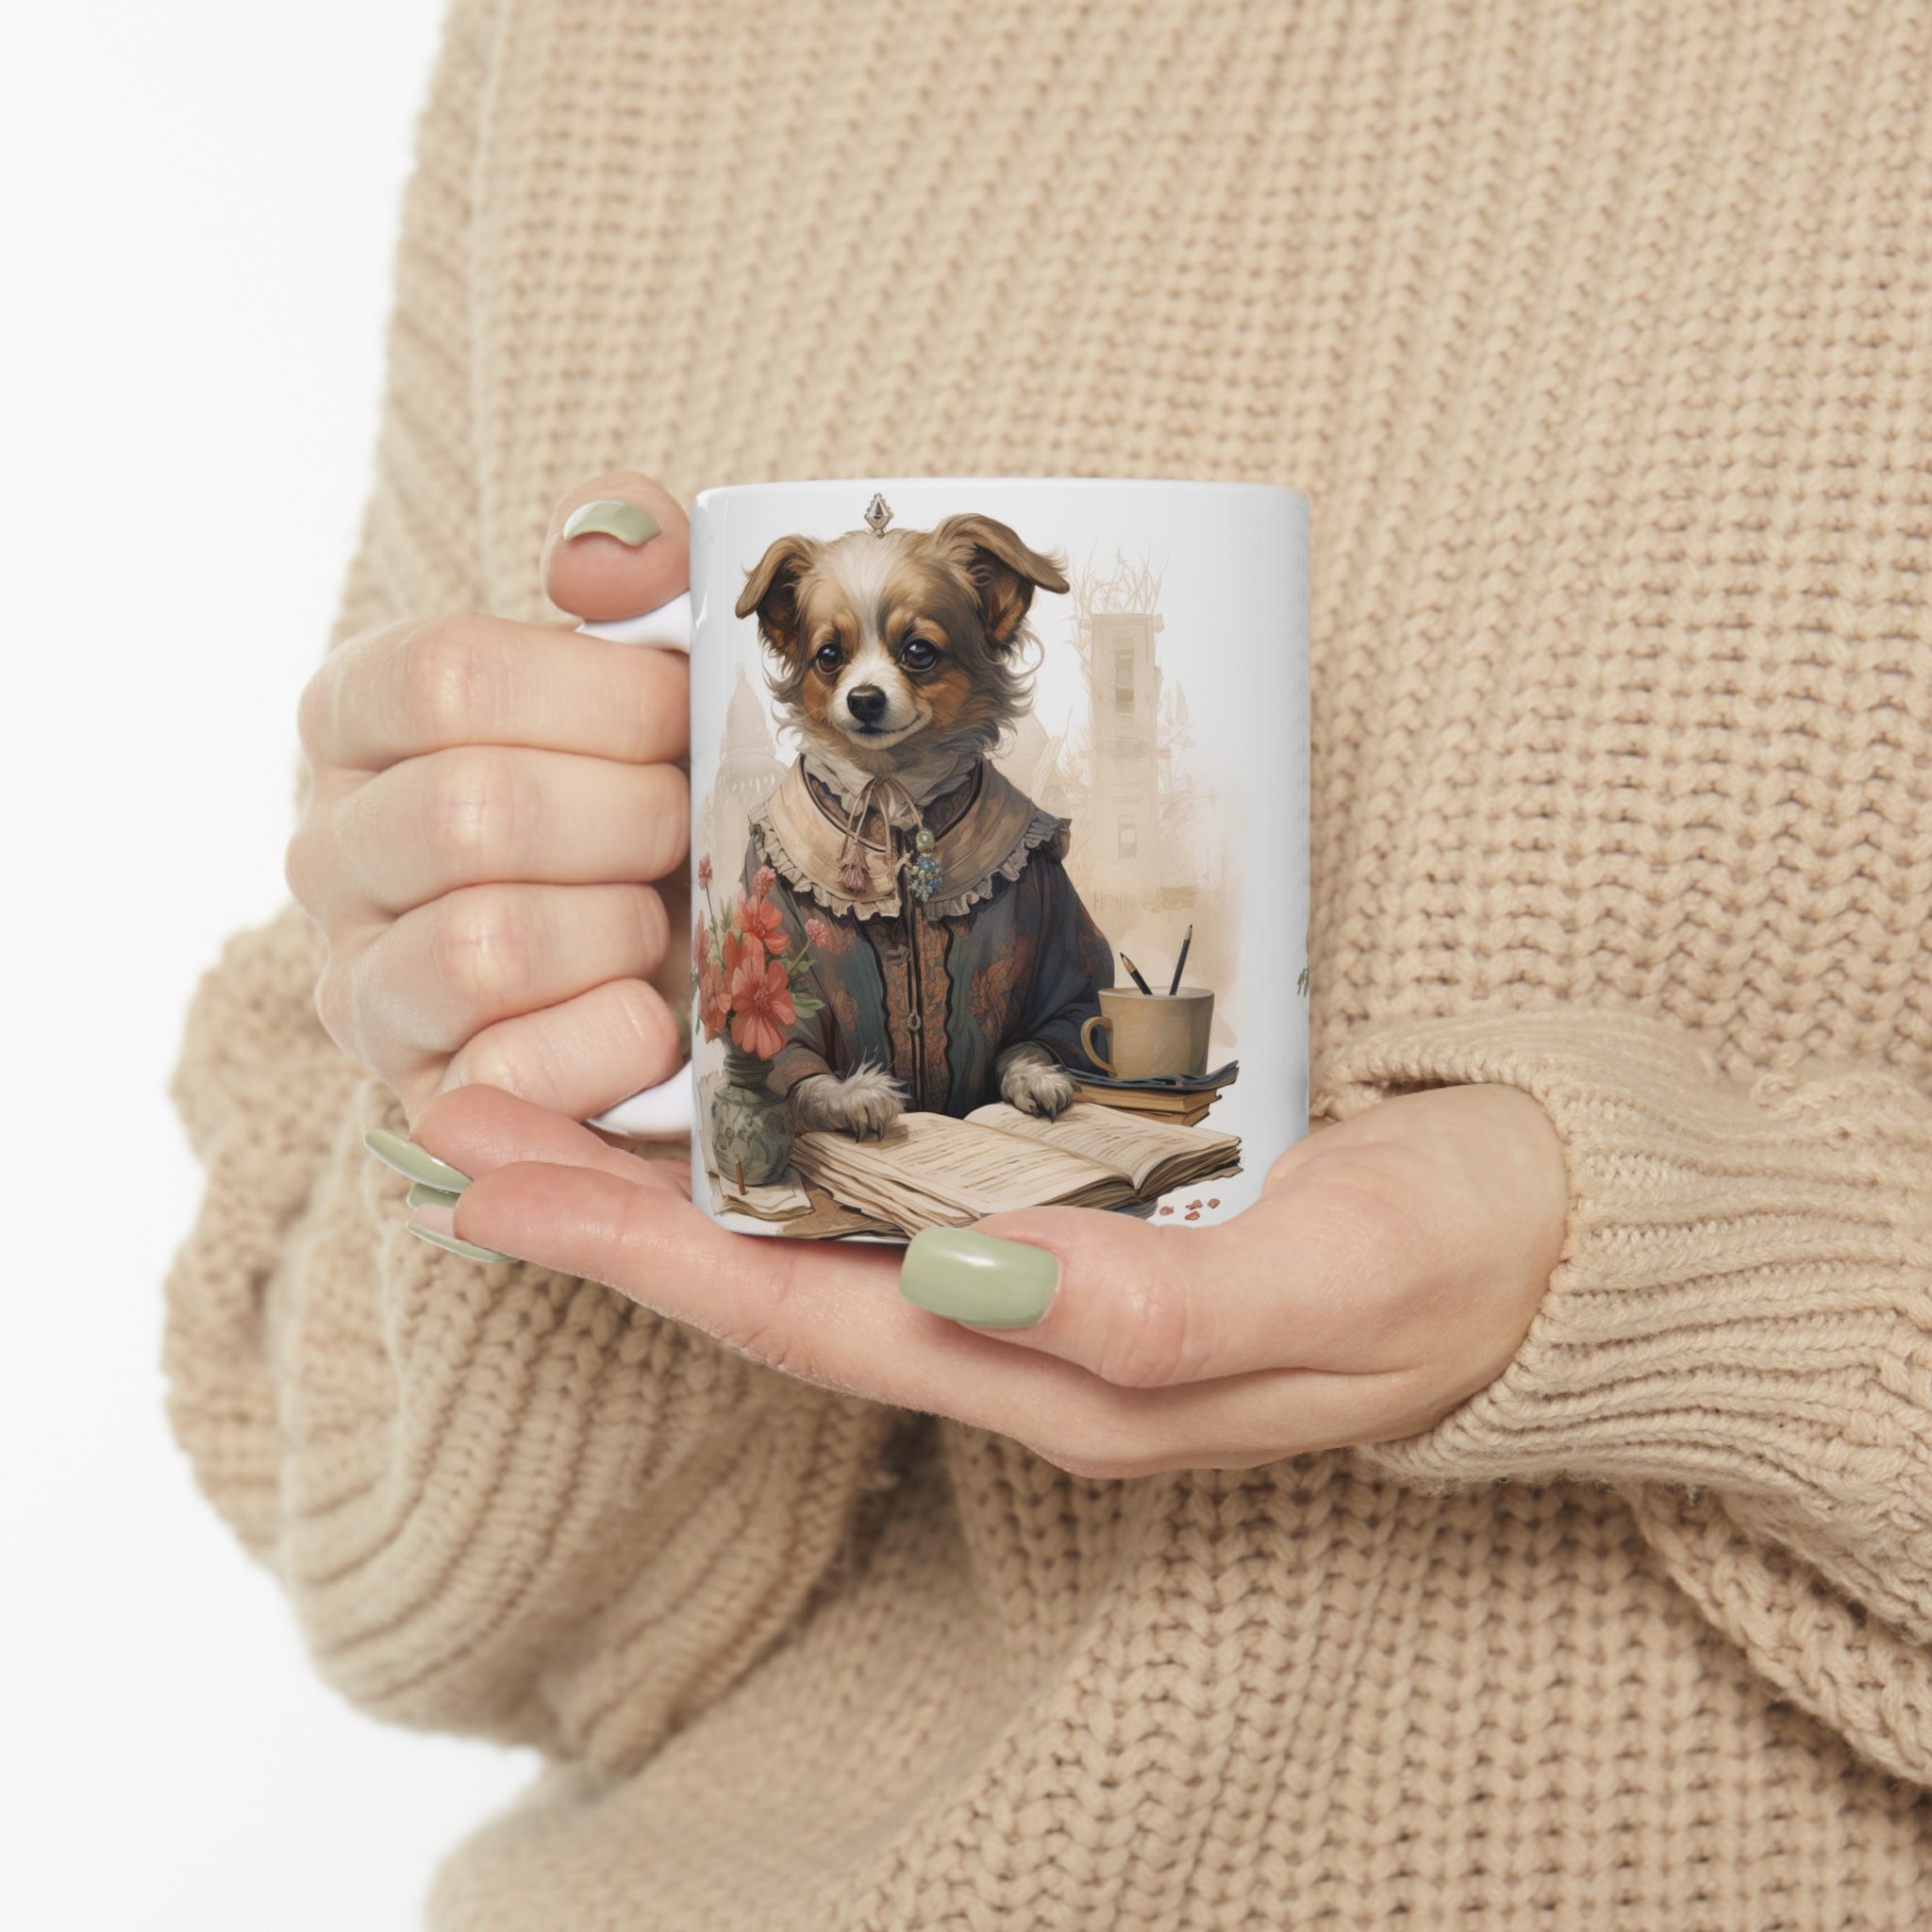 Gift for Mothers on Mother's Day: Relaxing Garden Pet 11oz Ceramic Mug | Exclusive Floral Doggy Design | Professional Artwork | Durable & Aesthetic Drinkware